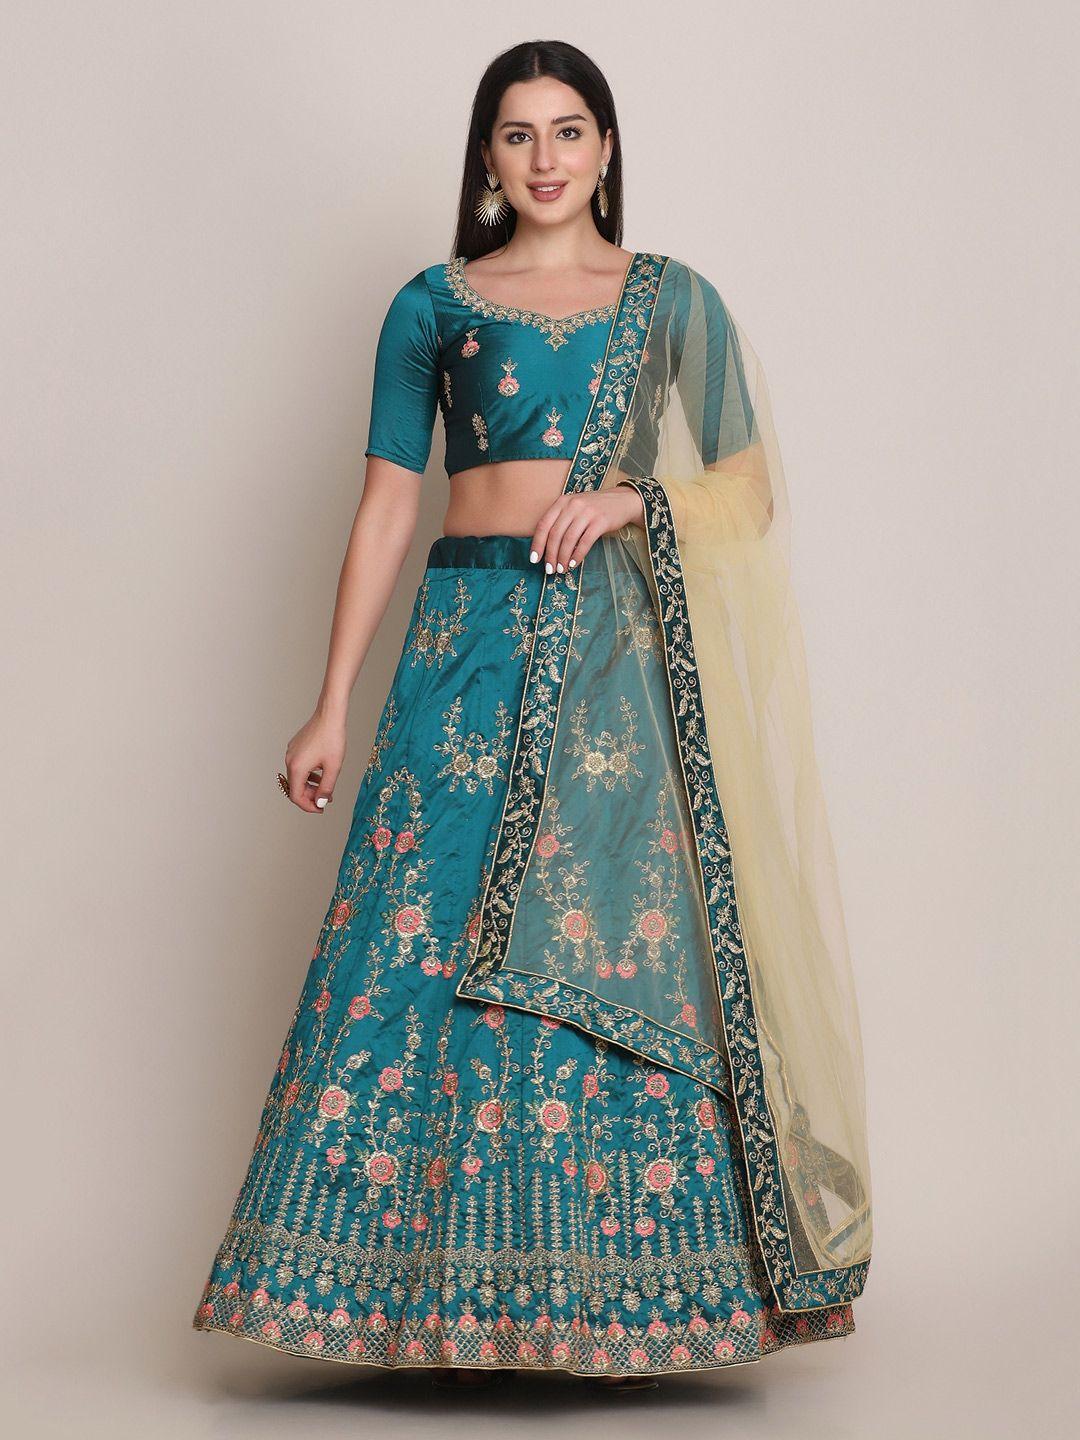 warthy ent sea green & gold embroidered semi-stitched lehenga & unstitched blouse with